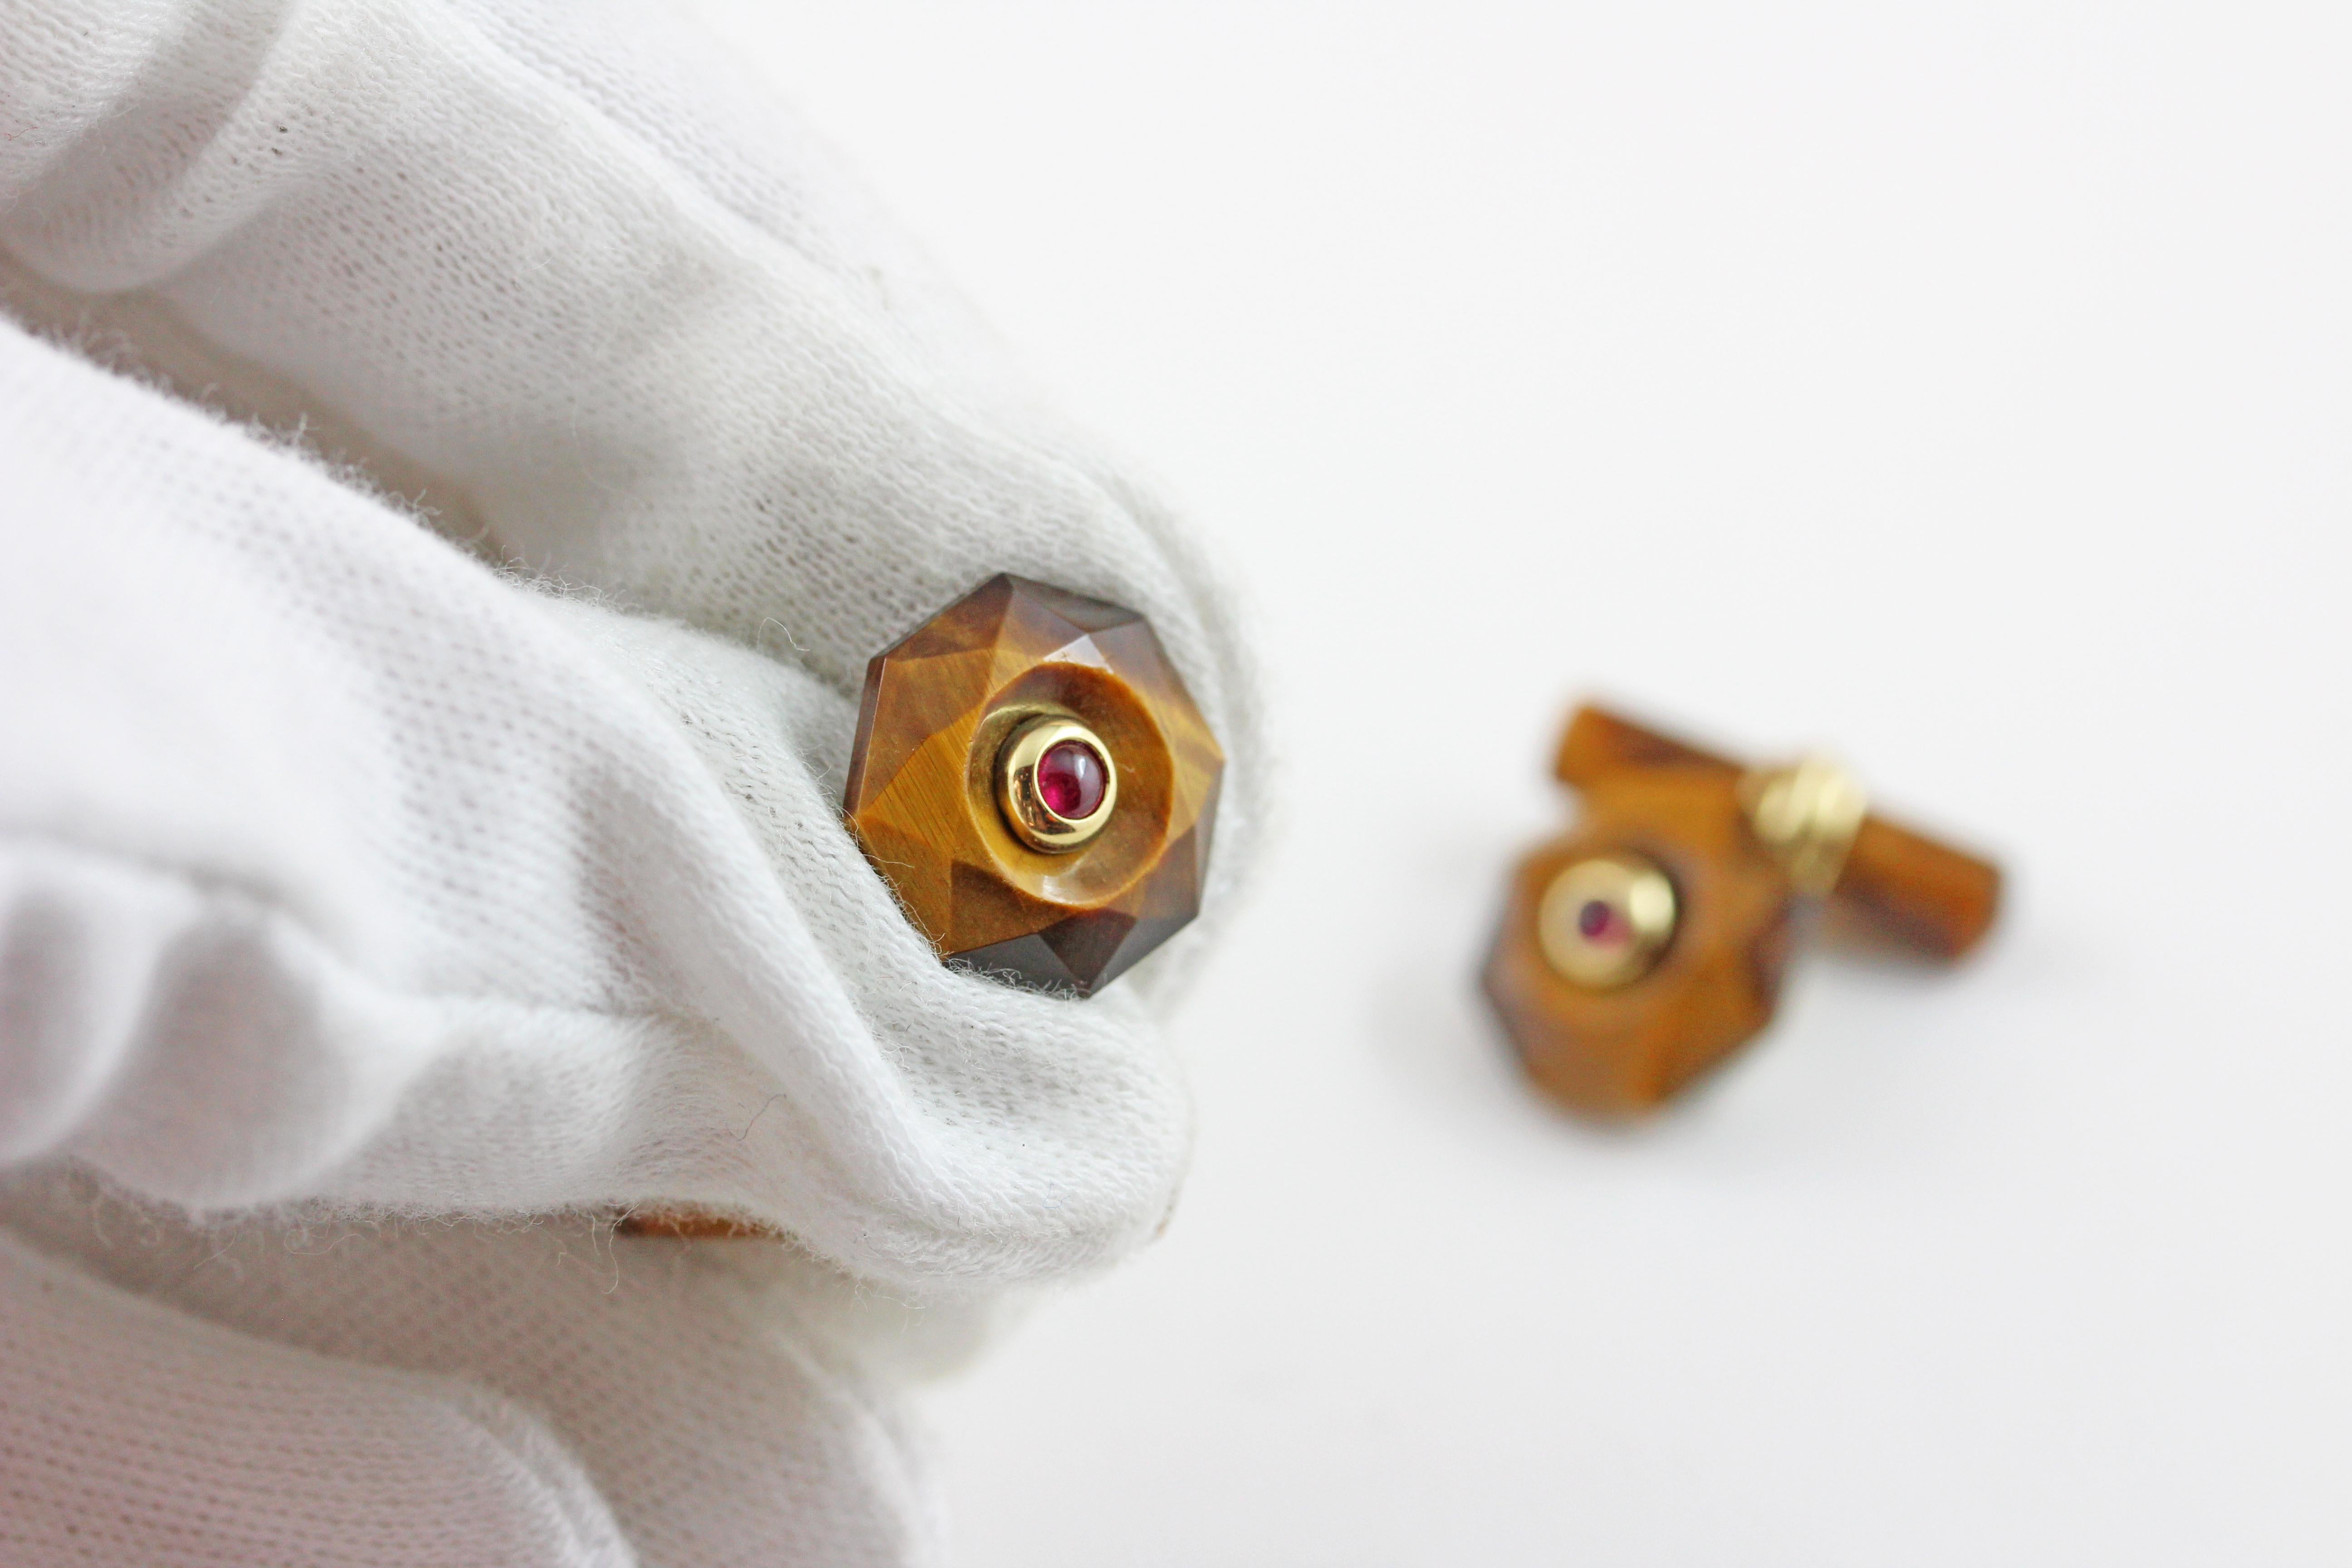 The front face of these exquisite cufflinks has a striking octagonal shape that is convex, multifaceted and adorned in the center with a cabochon rubies.
Both the front face and the cylindrical toggle are in Tiger's Eye, with a post made of 18 karat